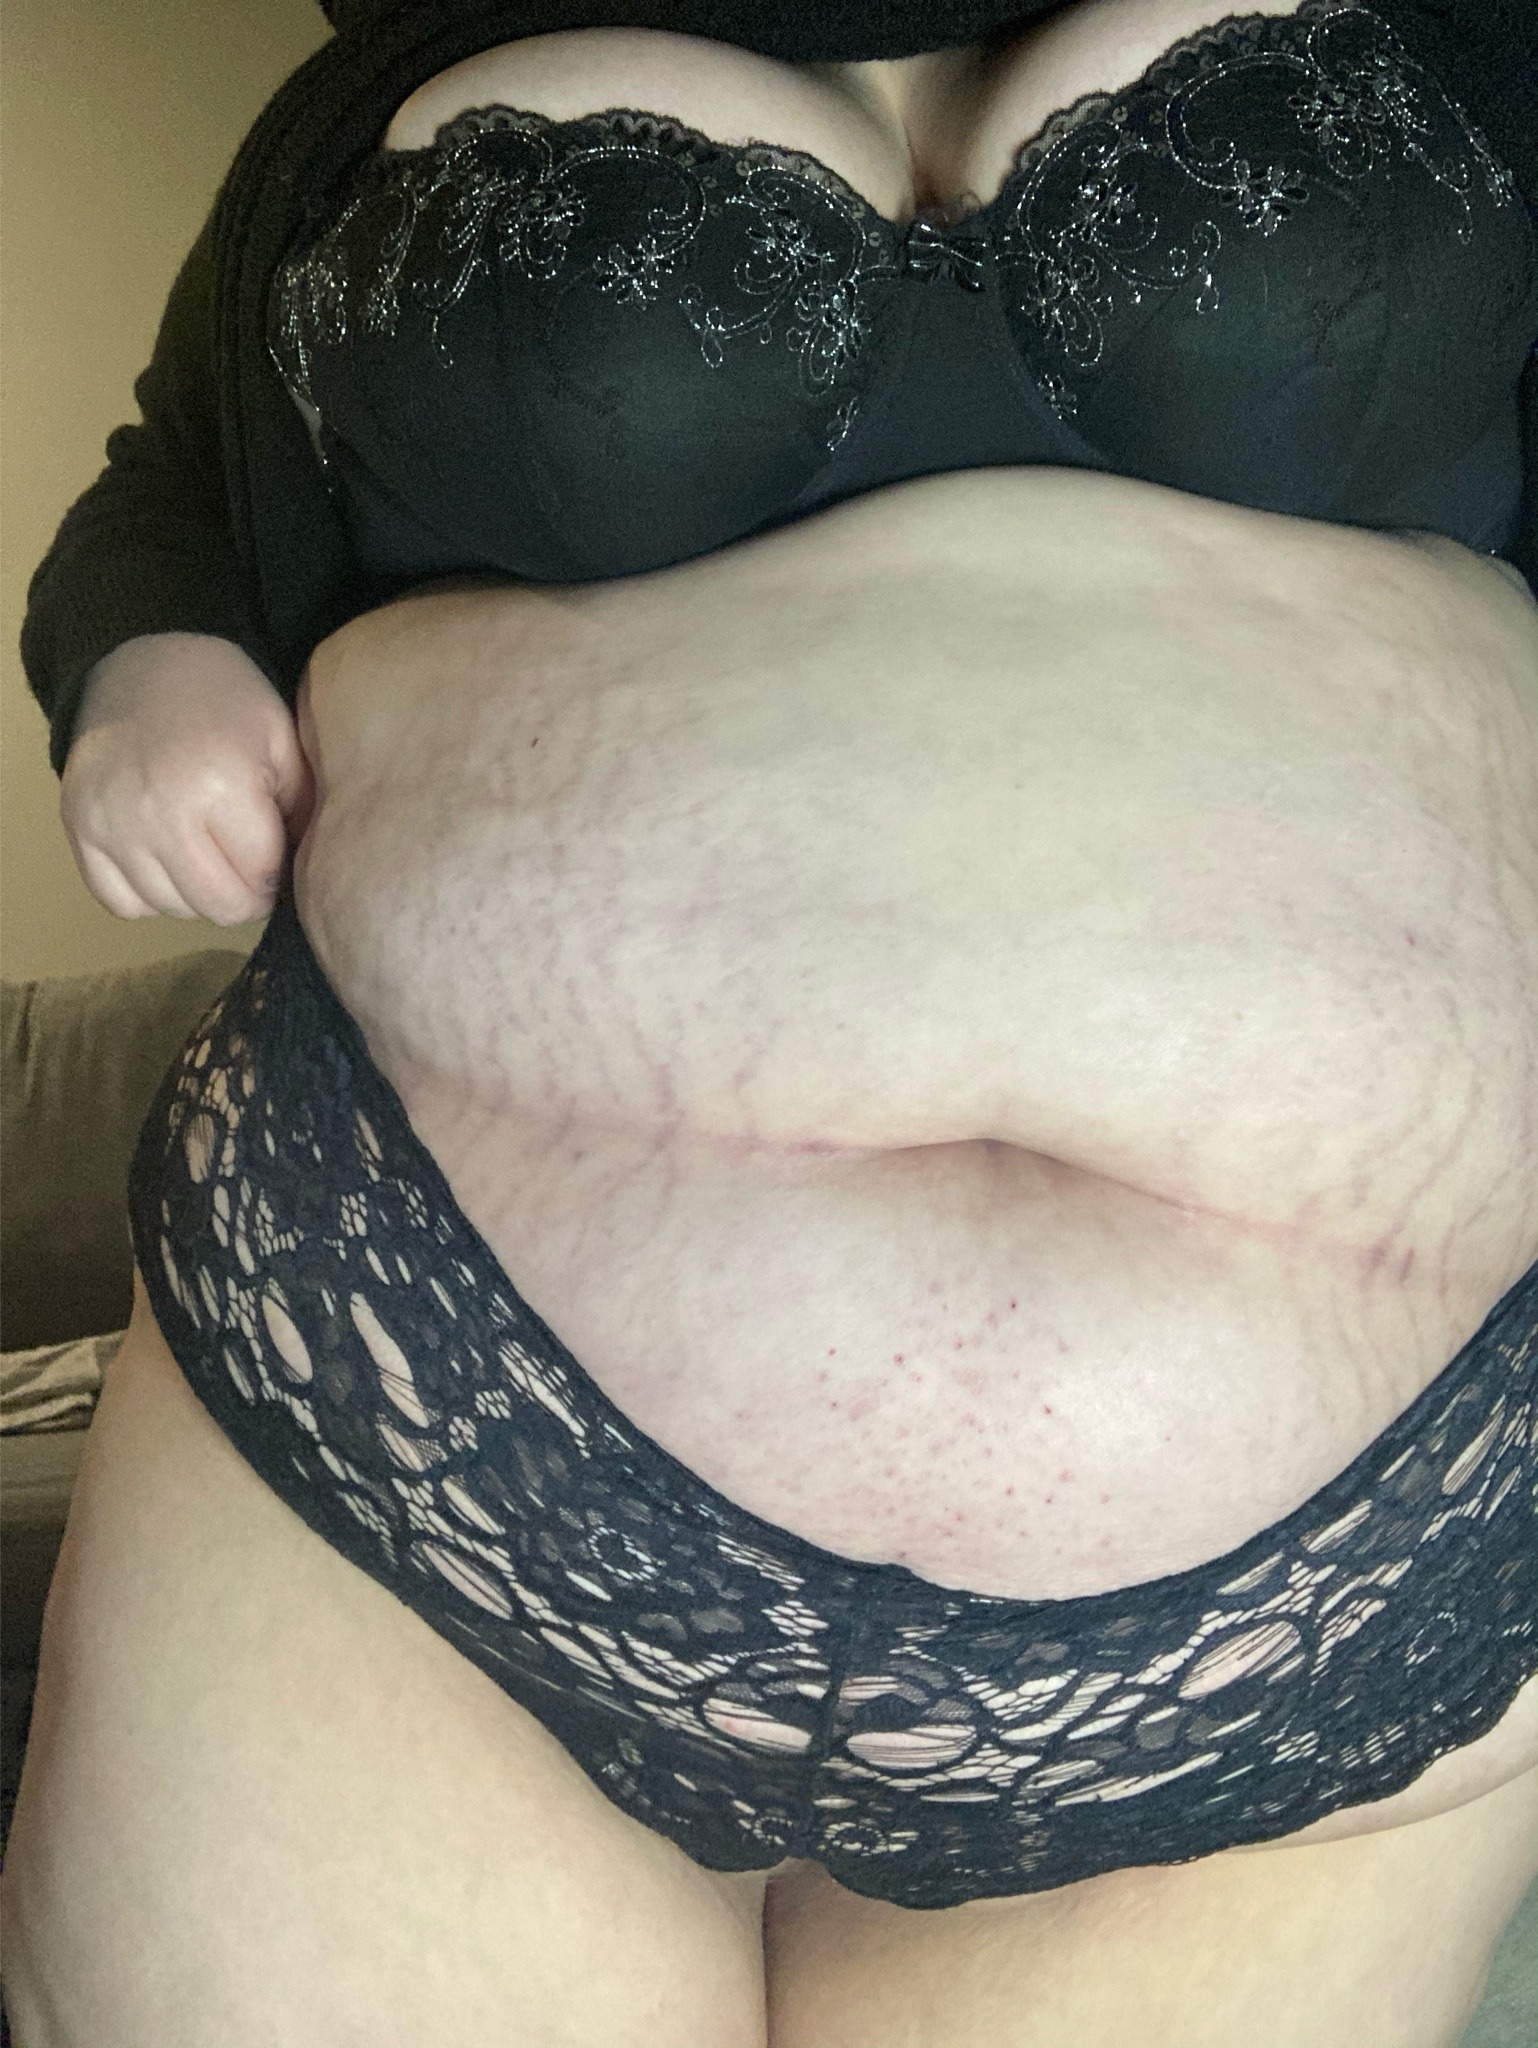 Porn Pics theplushblonde:A little lace and bounce never